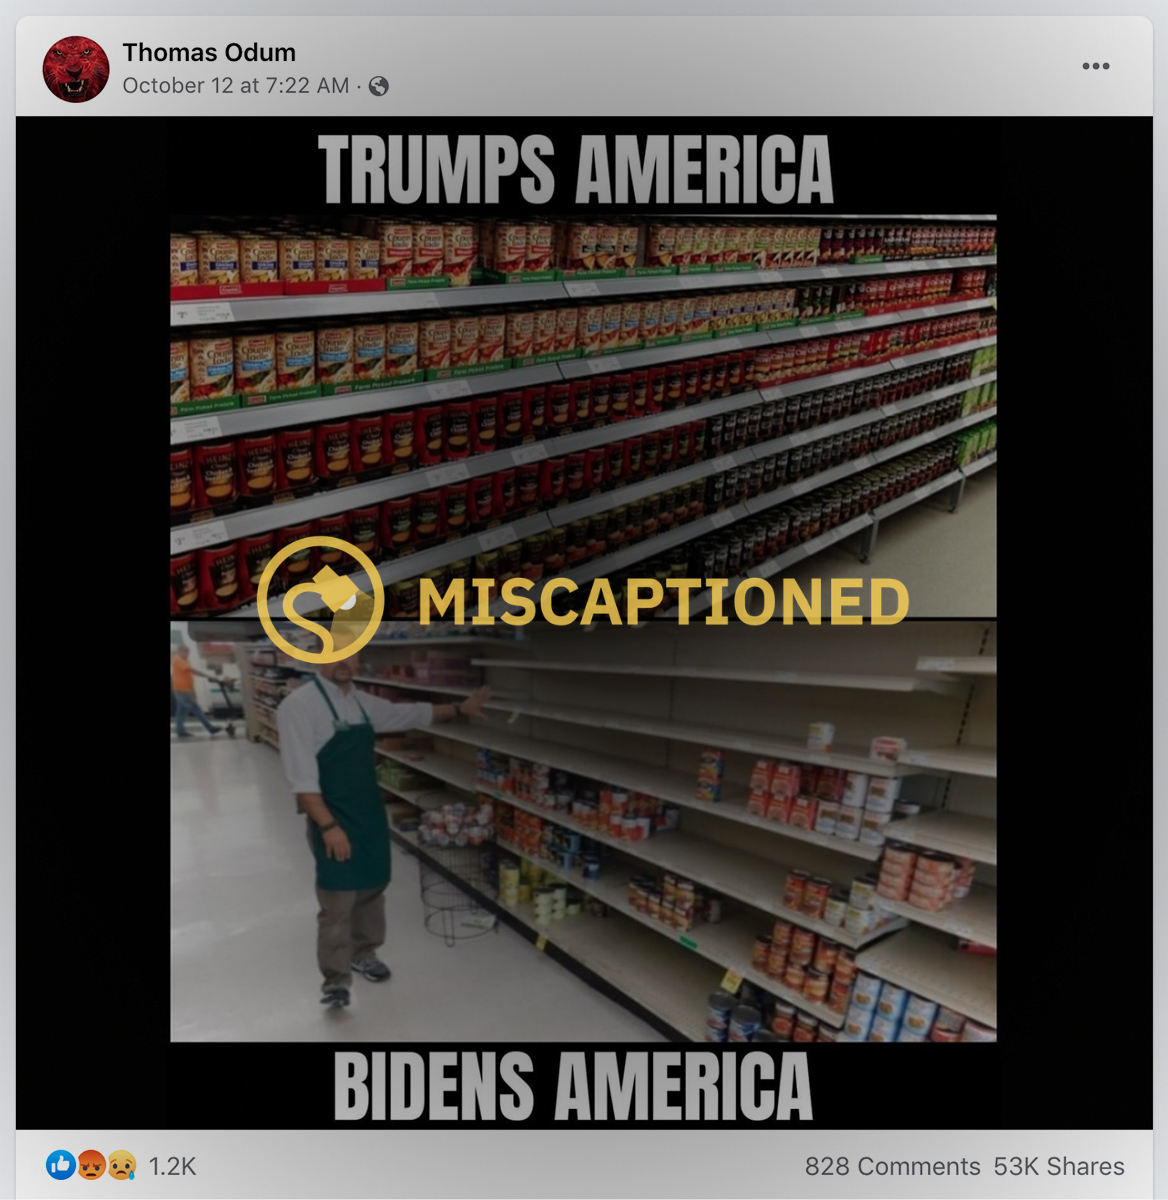 A Facebook meme claimed and mentioned Trump's America and Biden's America and showed empty and full shelves in a grocery store.